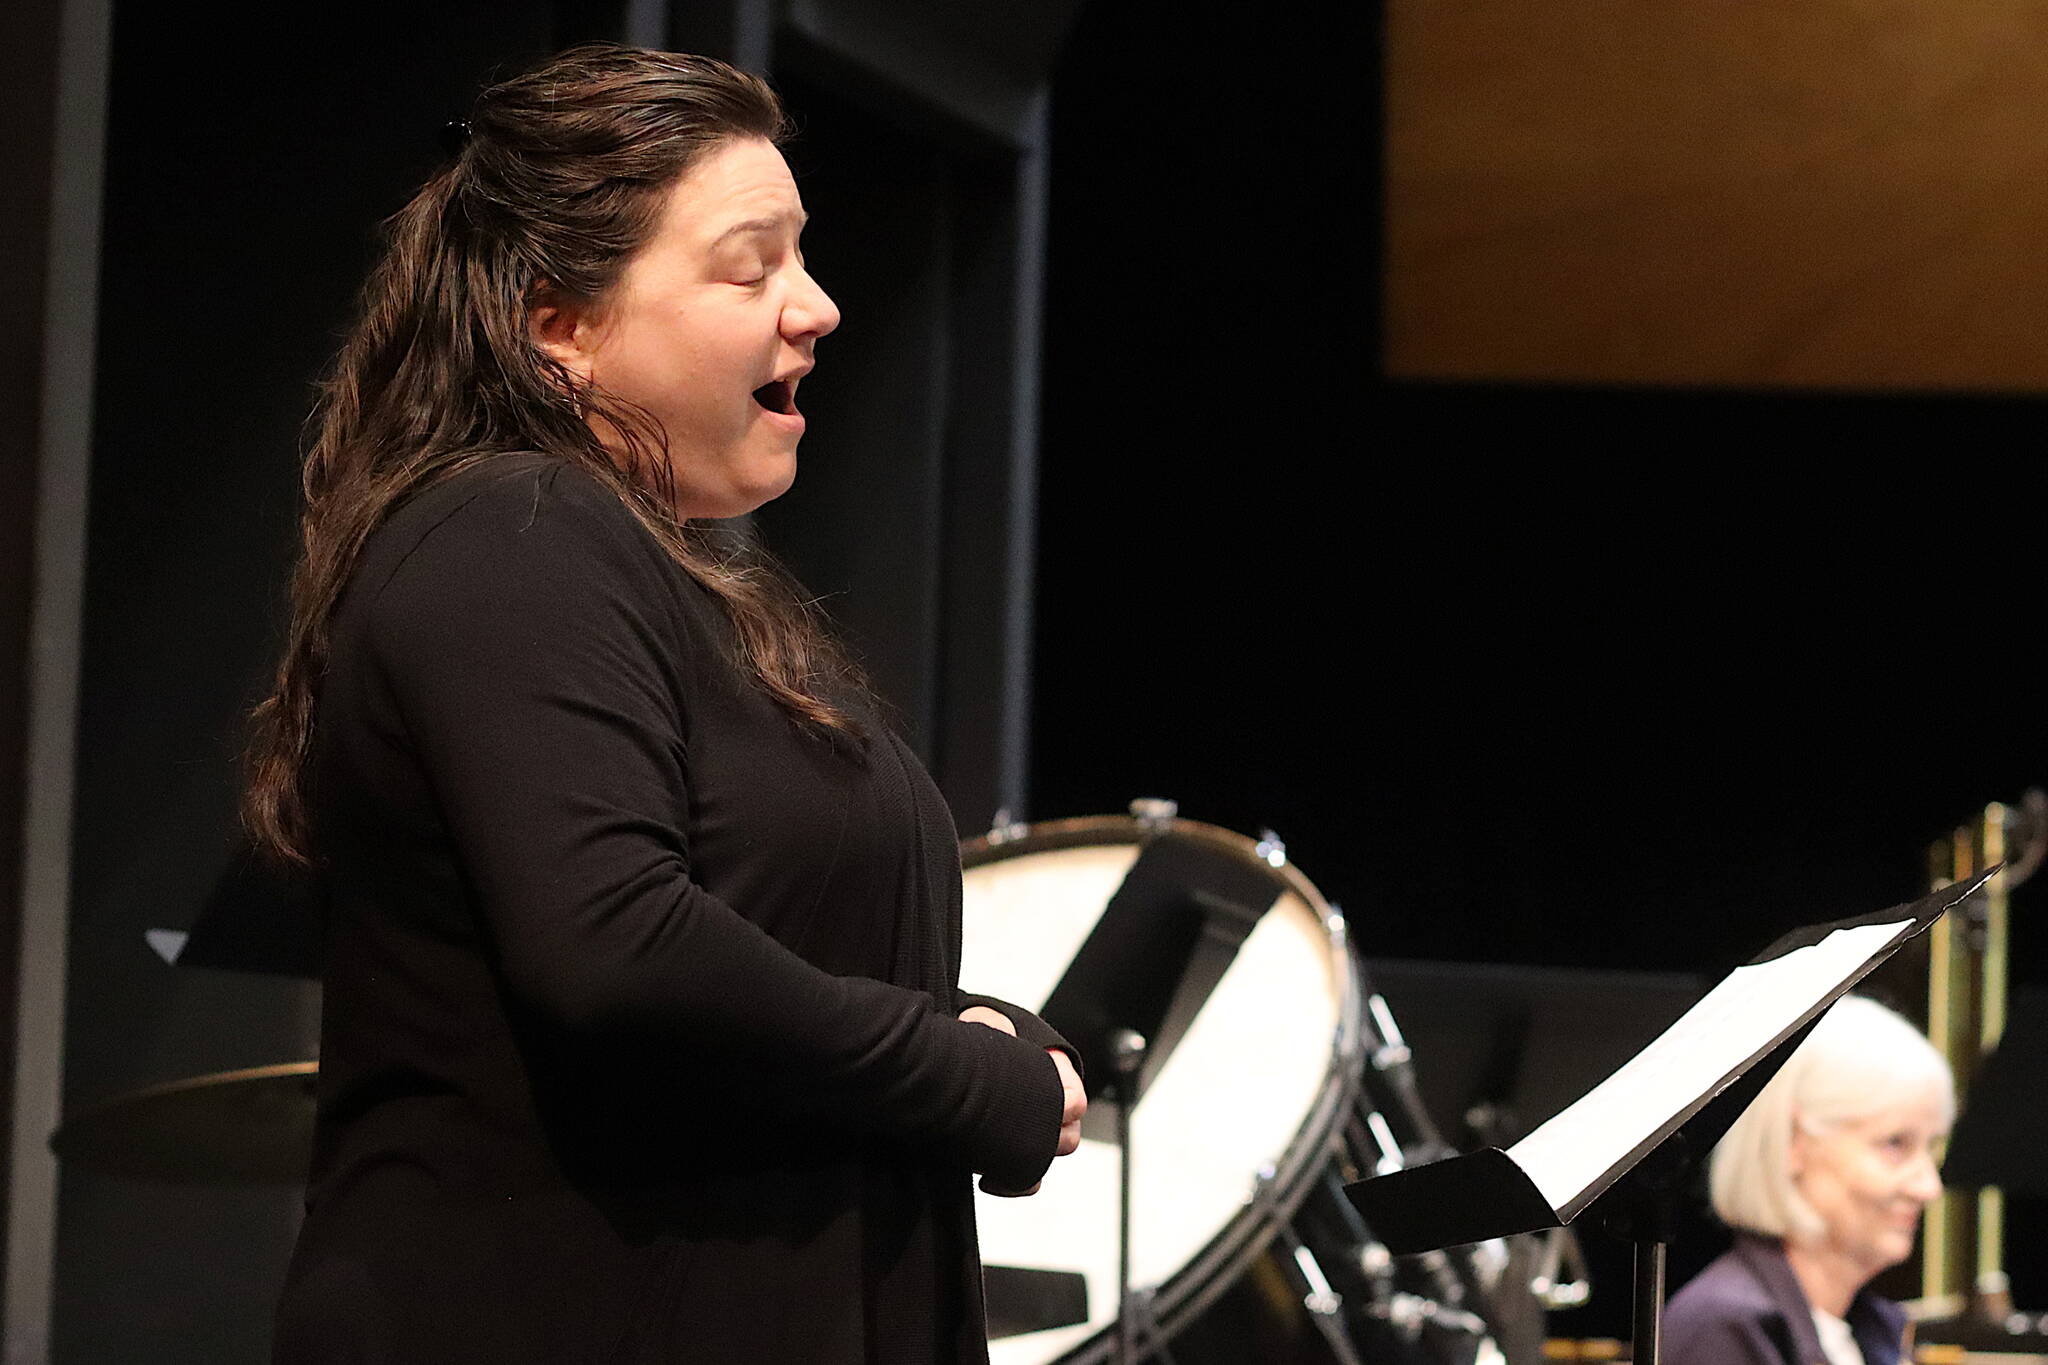 Sara Radke Brown sings a composition from “The Lord of the Rings” film trilogy during a concert rehearsal Tuesday at Juneau-Douglas High School: Yadaa.at Kalé. Two concerts this weekend will feature the first vocal performances ever under current music director Christopher Koch. (Mark Sabbatini / Juneau Empire)